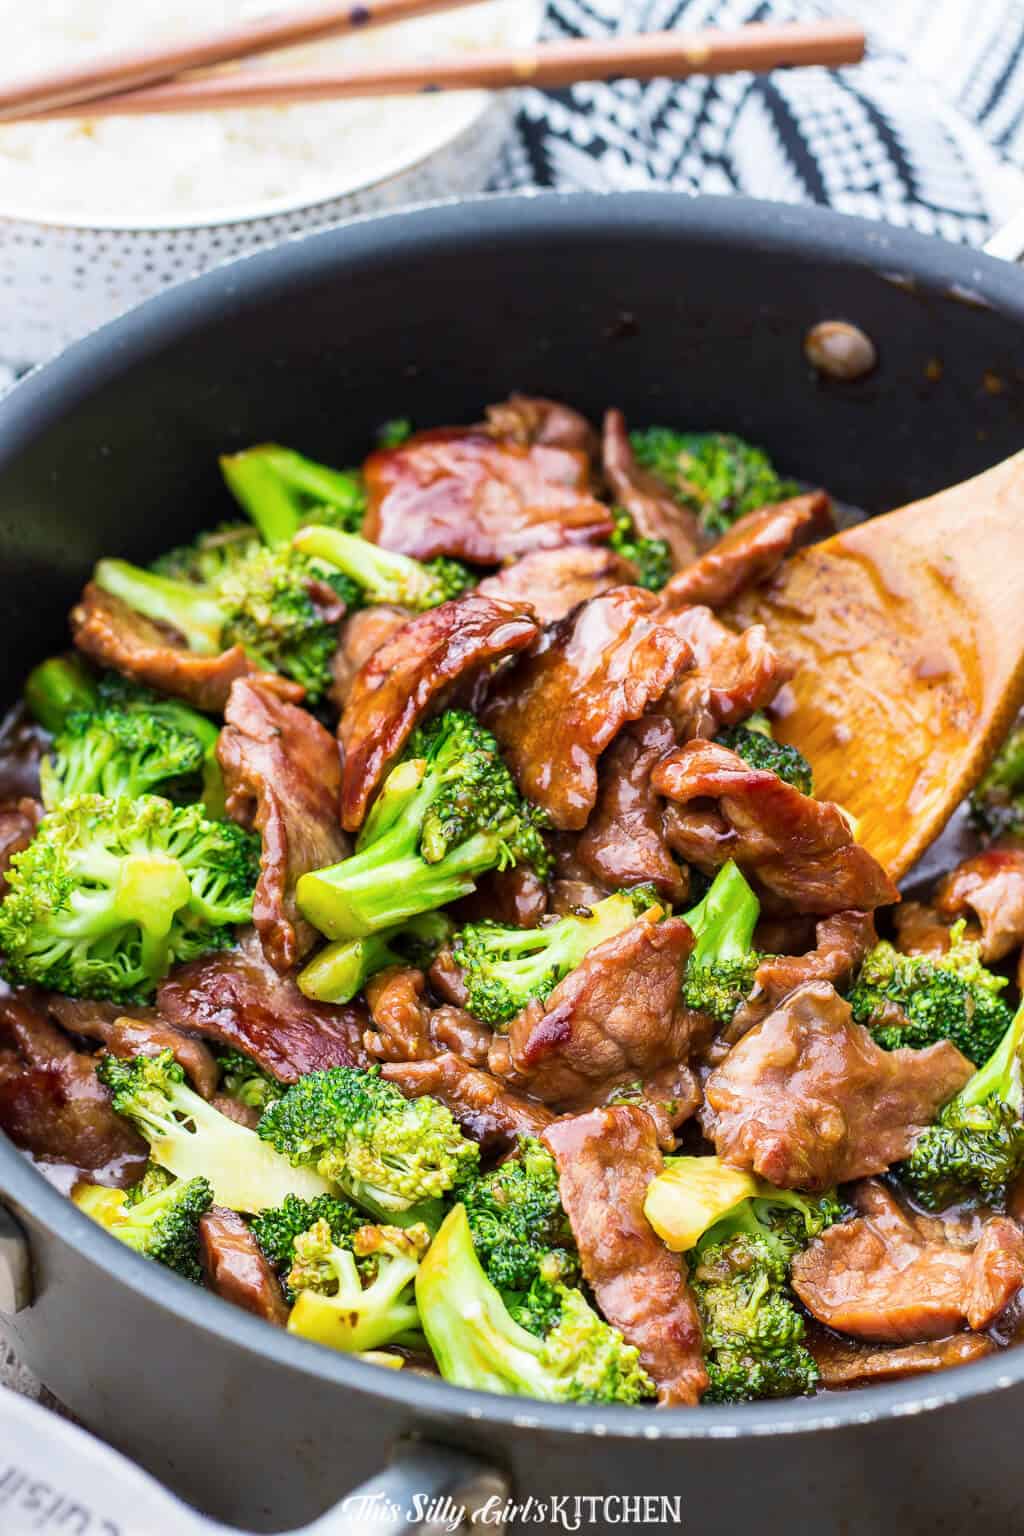 Beef and Broccoli in cooking pan with wooden spoon